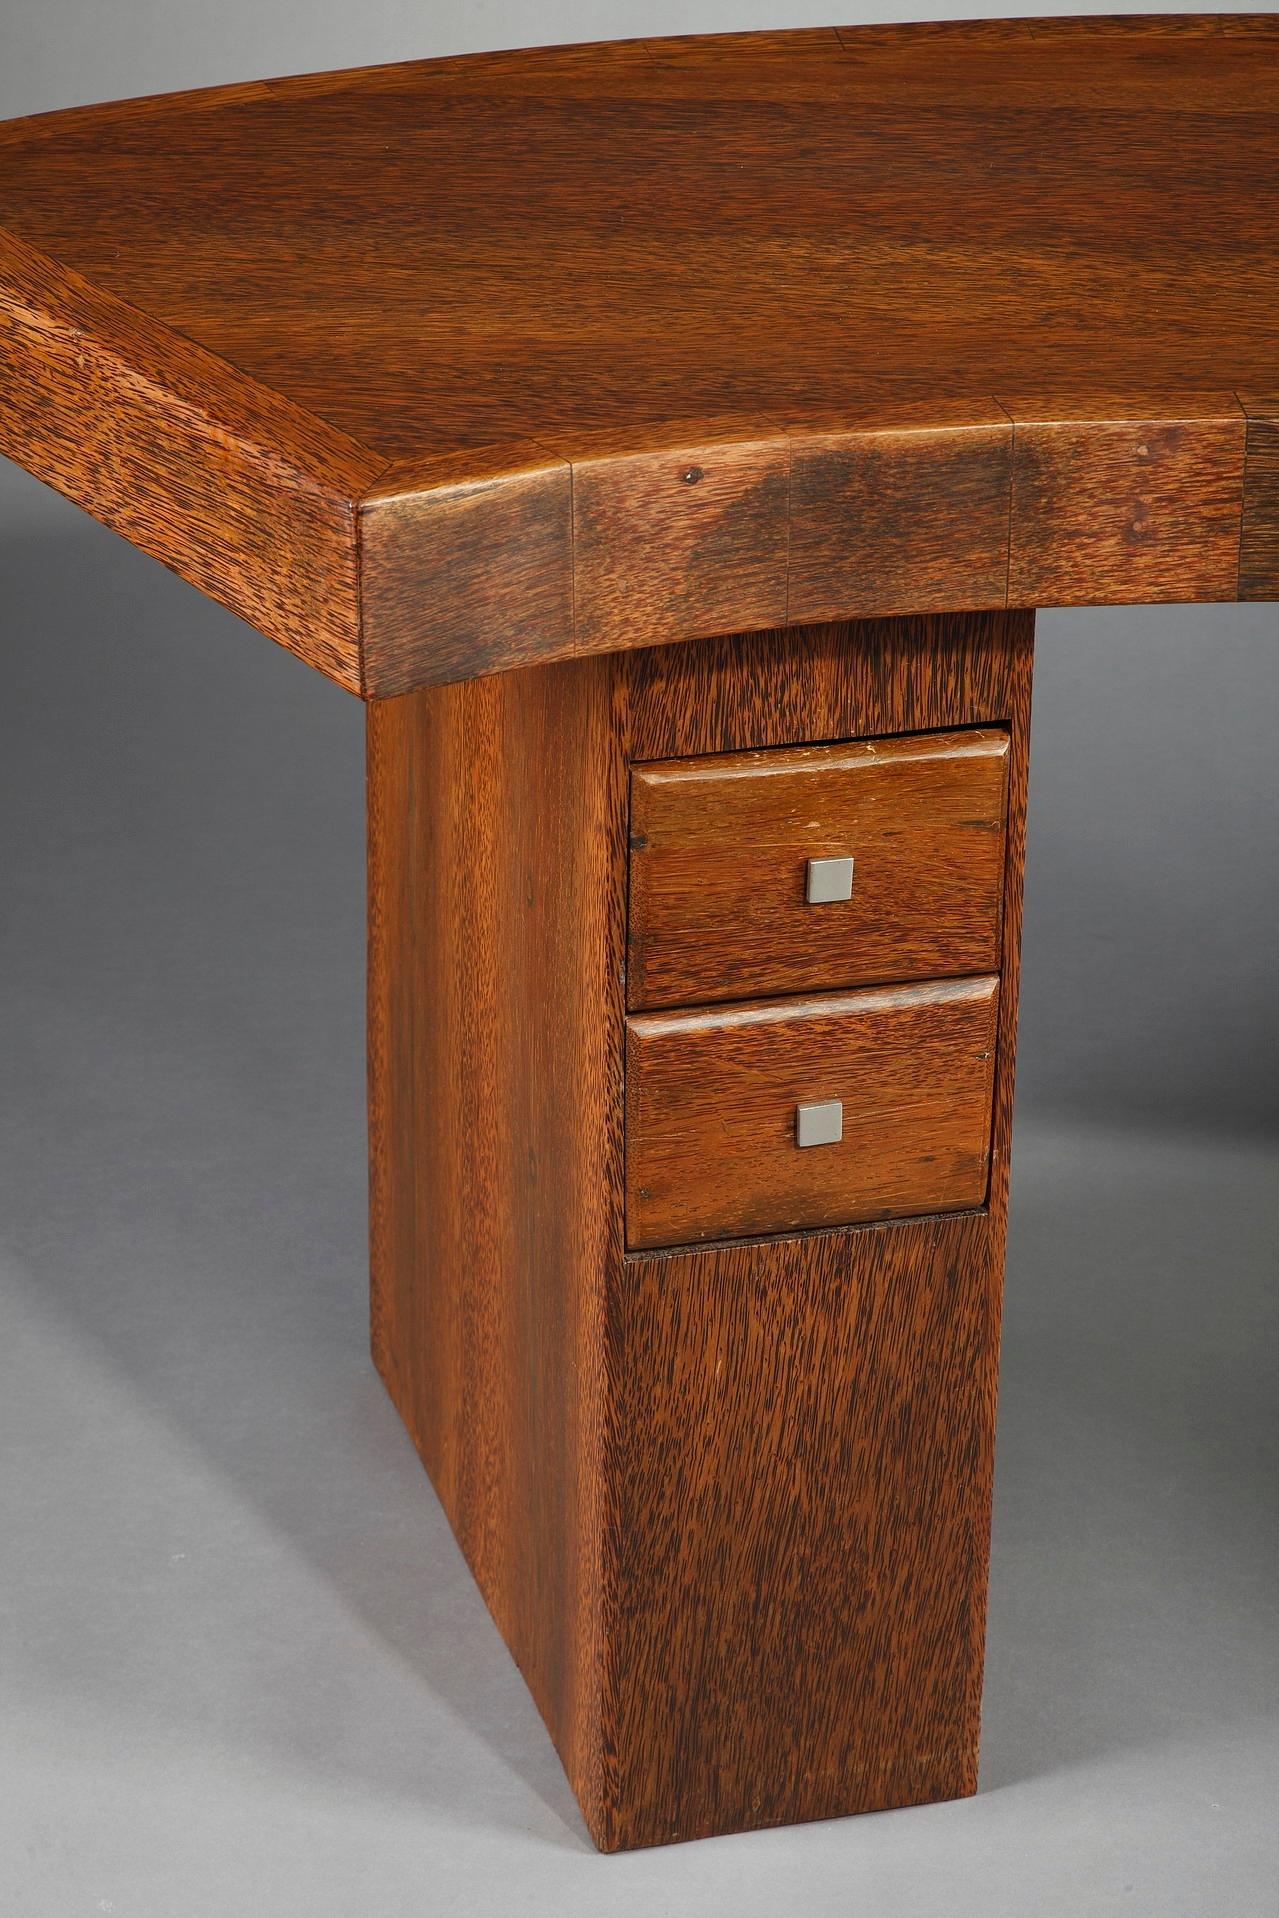 Art Deco writing desk crafted of palmwood. It boasts a large, curved writing surface, resting on two rectangular legs. The desk reveals two small drawers in each leg. This French desk is very elegant in both simplicity and severity of form,

circa